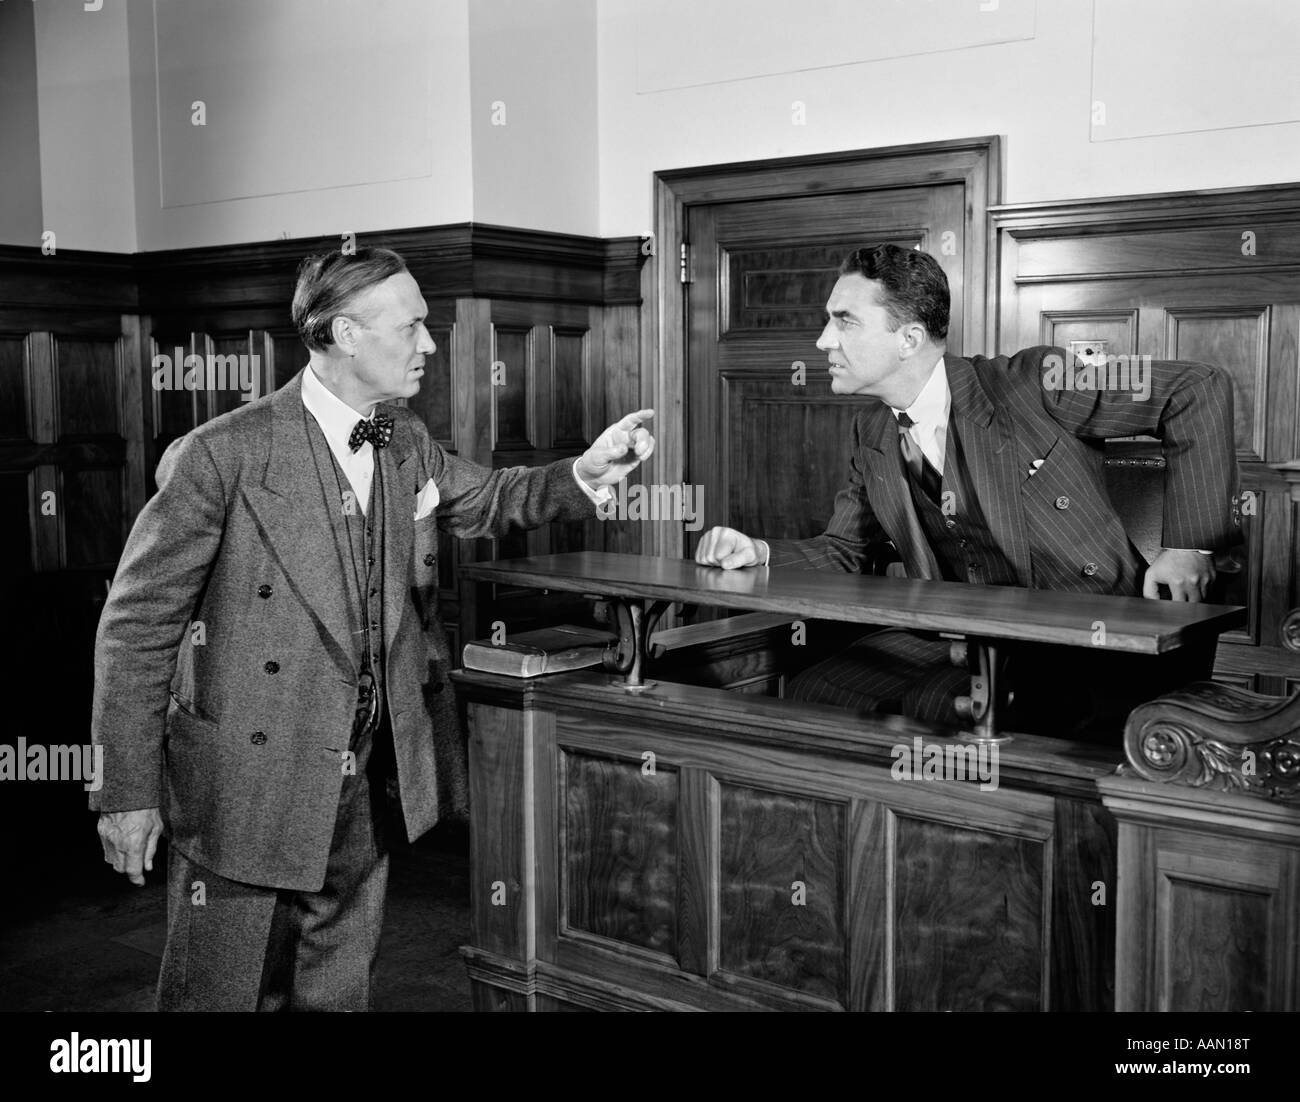 1940s 1950s 2 MEN ATTORNEY LAWYER POINT ARGUE CASE BEFORE JUDGE LAW COURTROOM BENCH LEGAL Stock Photo